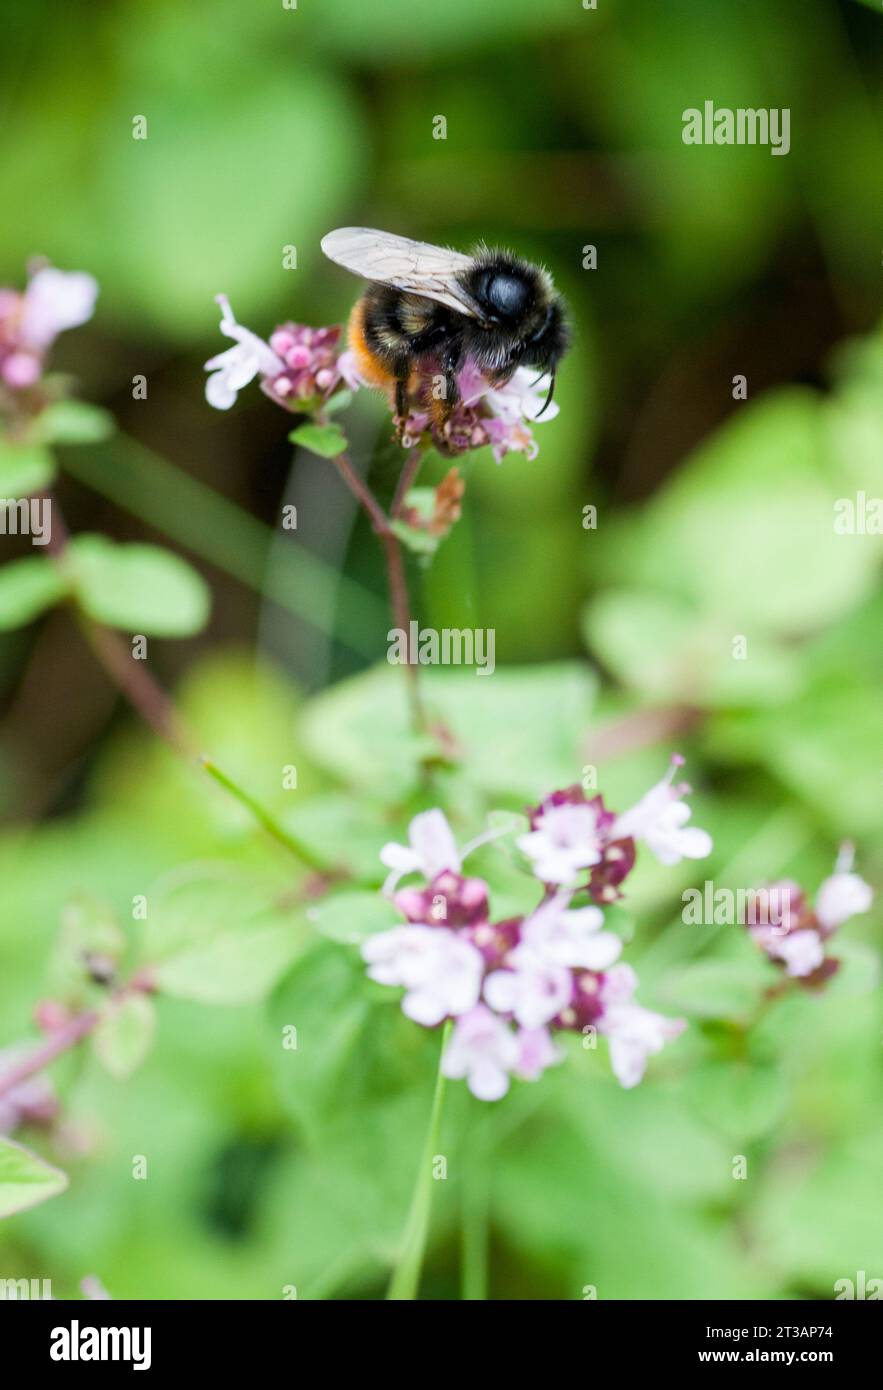 BUMBLE BEE on flower in garden Stock Photo